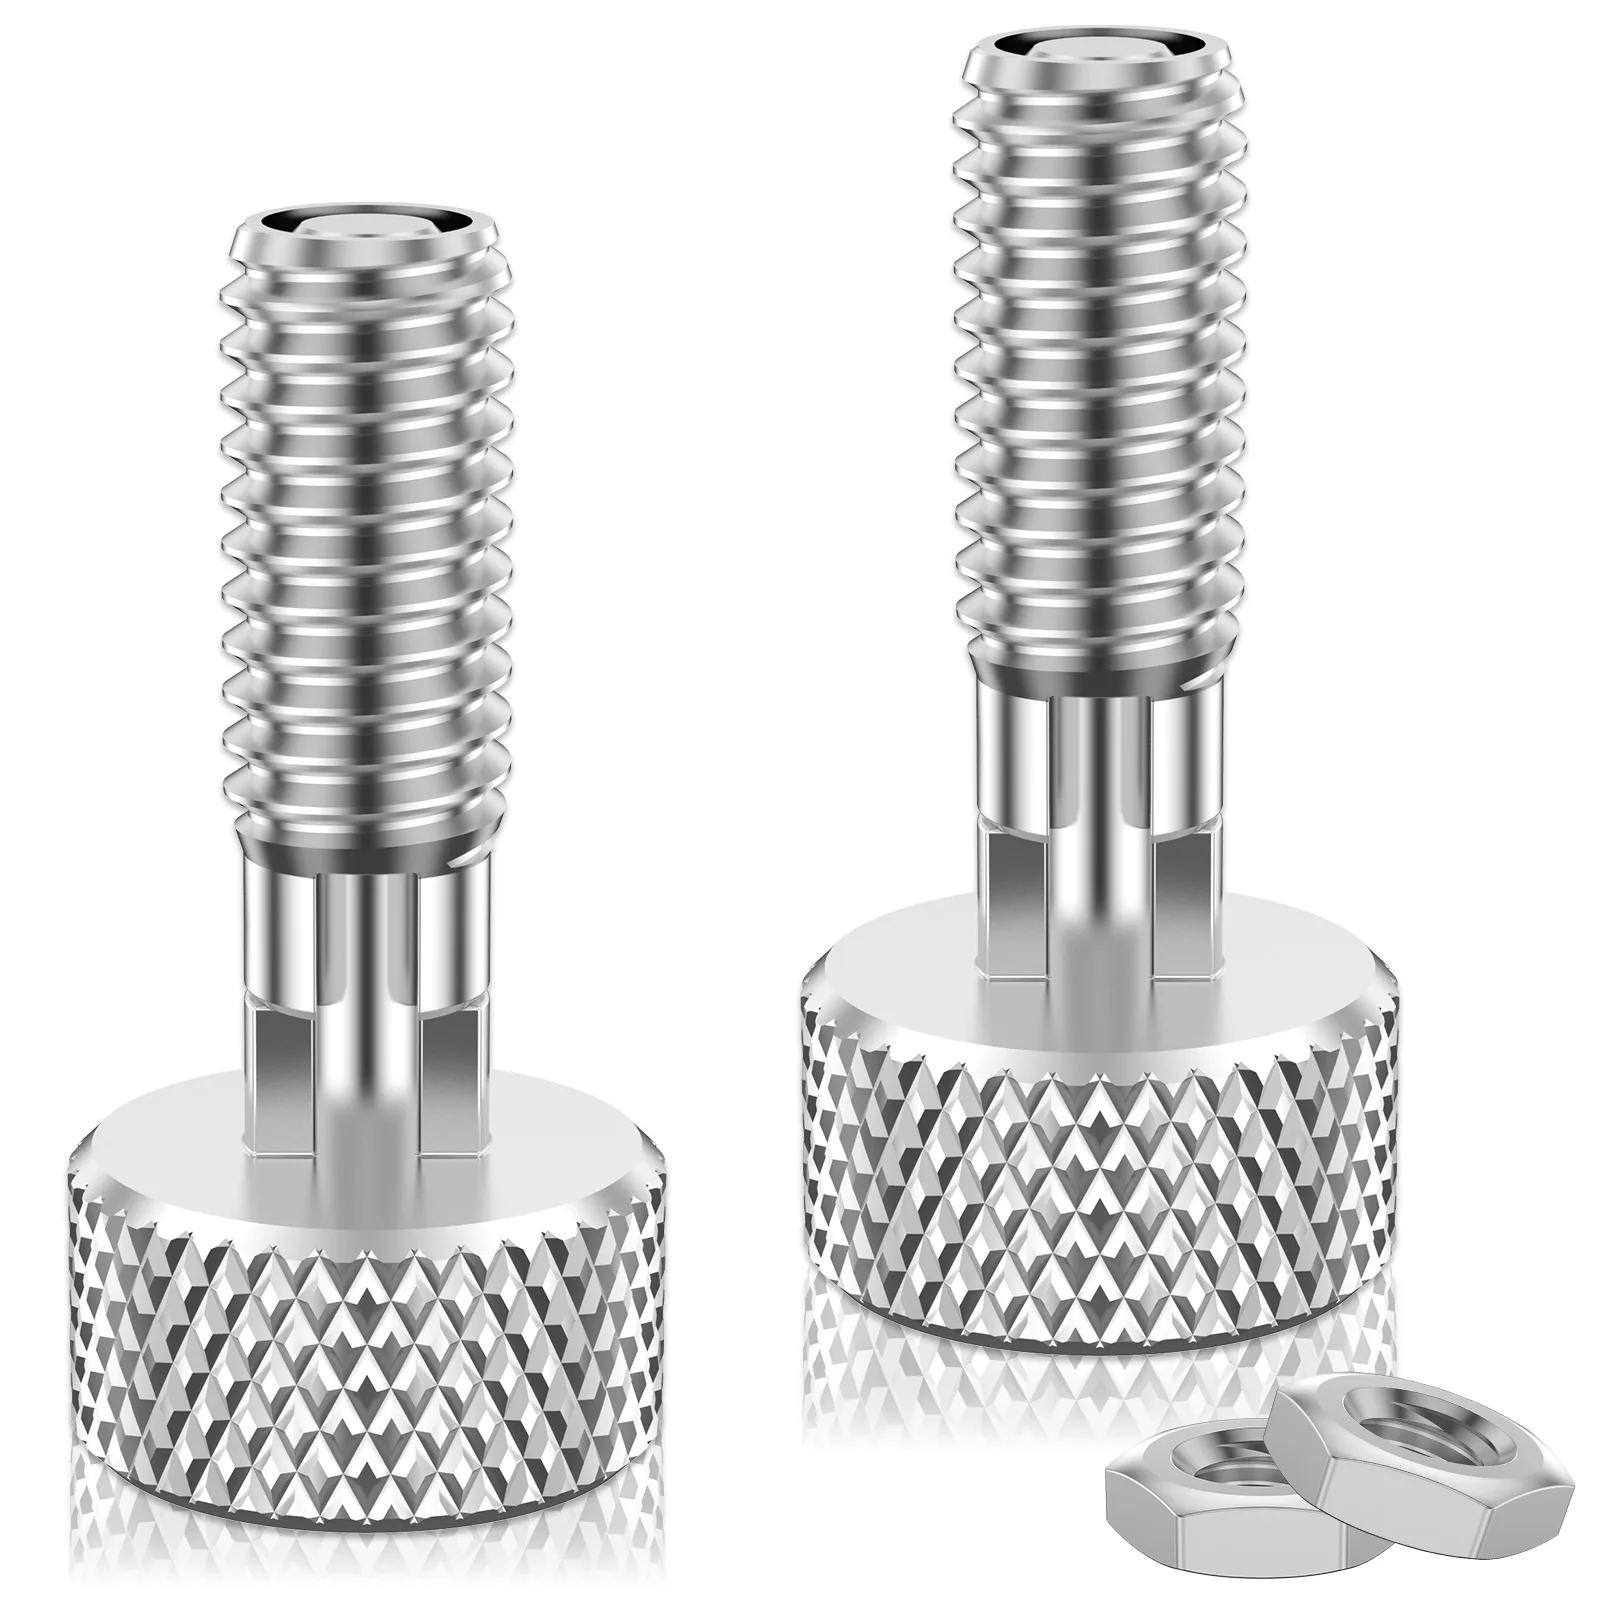 

2Pcs Handle Release Pins Kit Stainless Steel M6 Quick Release Pins Kit Sturdy Hand Retractable Spring Plunger with 2 Nut